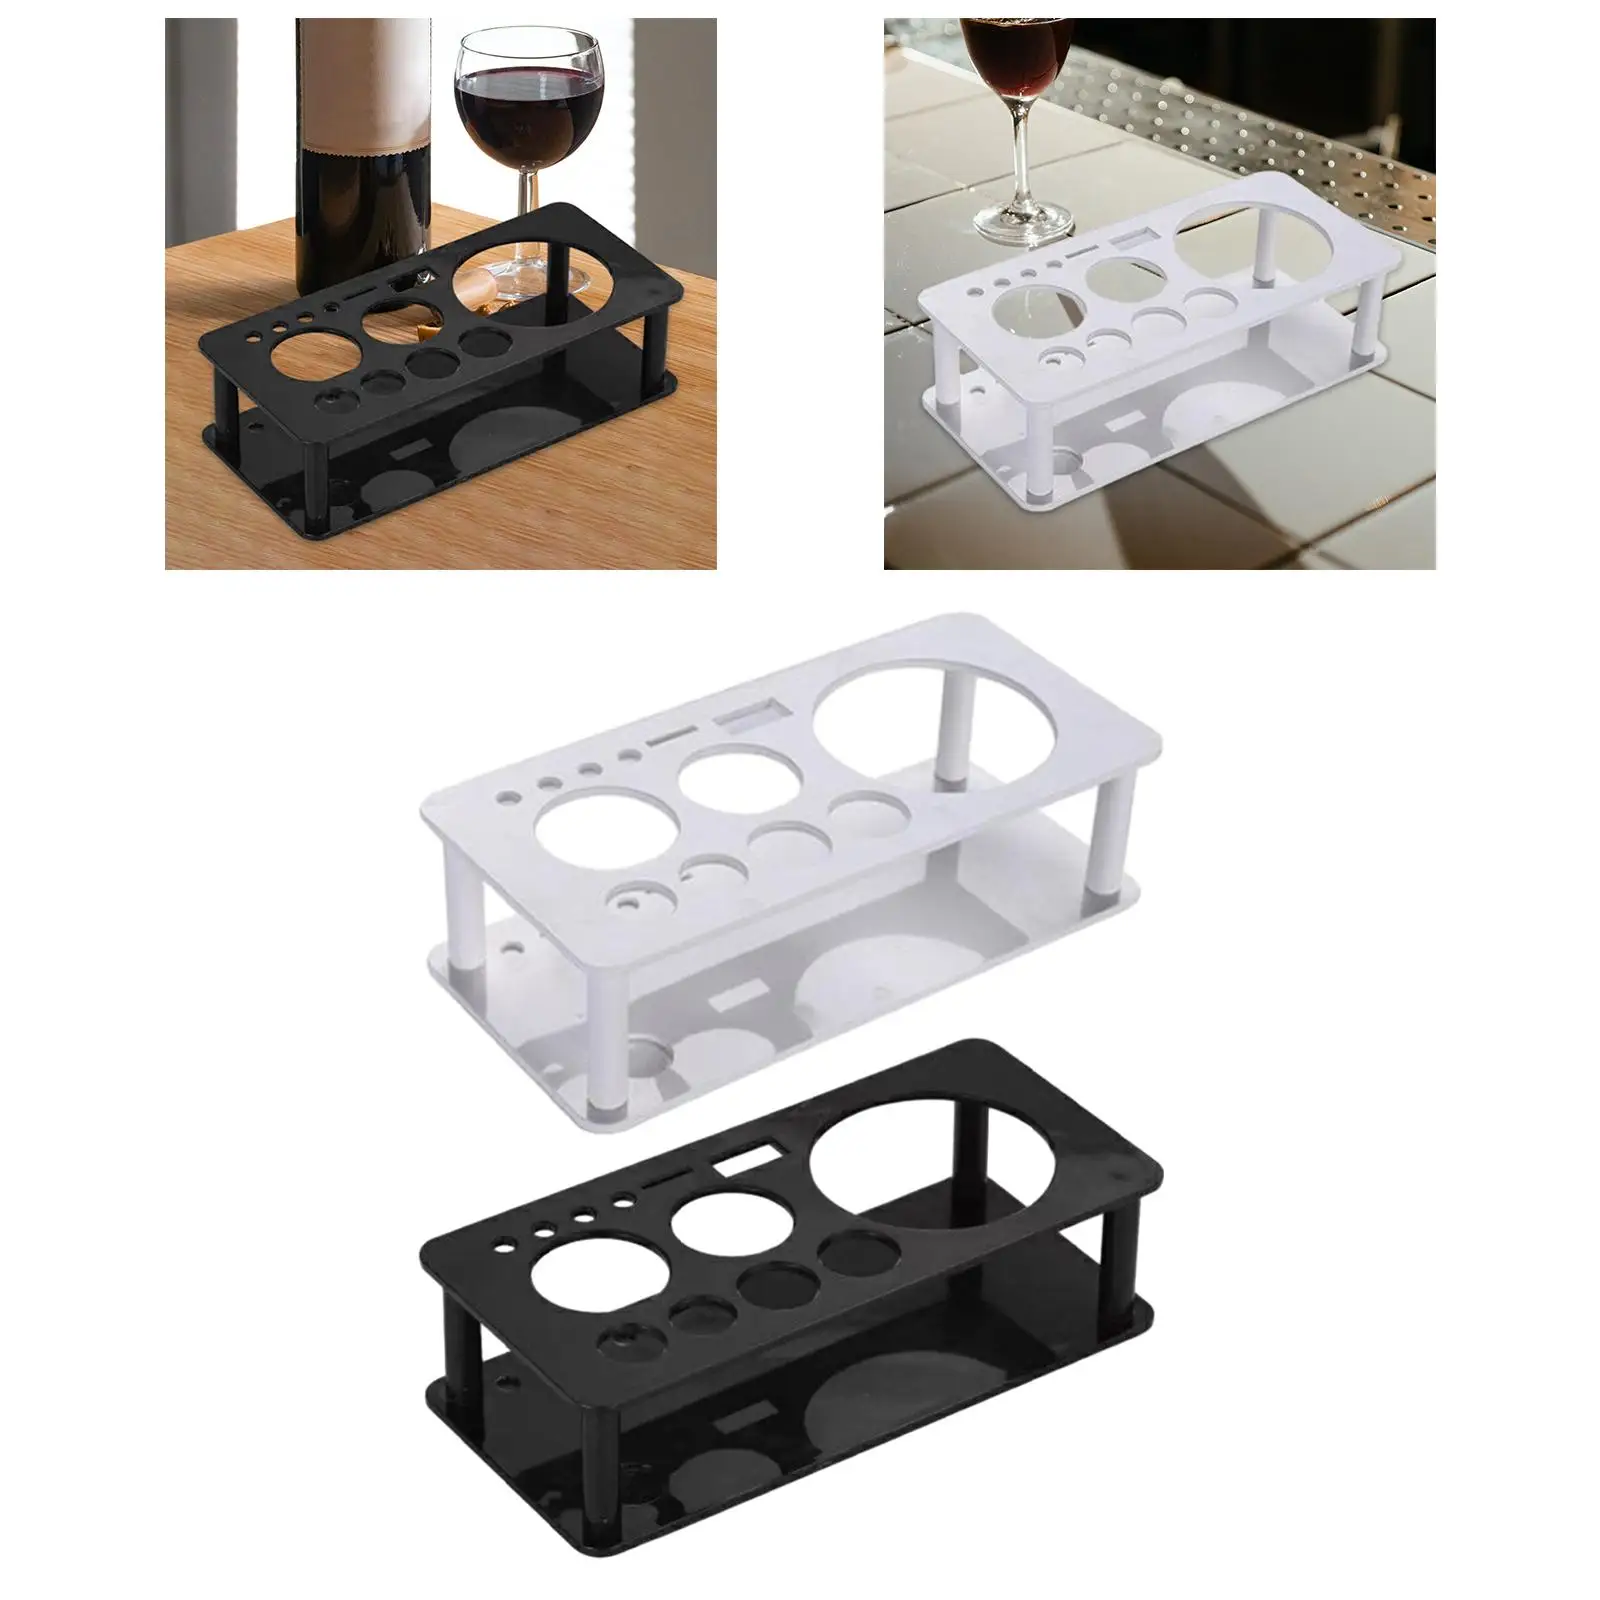 Cocktail Shaker Stand Portable Bar Tool Barware Drinkware Set Stand Bartender Tool Holder for Bar Home Wedding Beginners Party